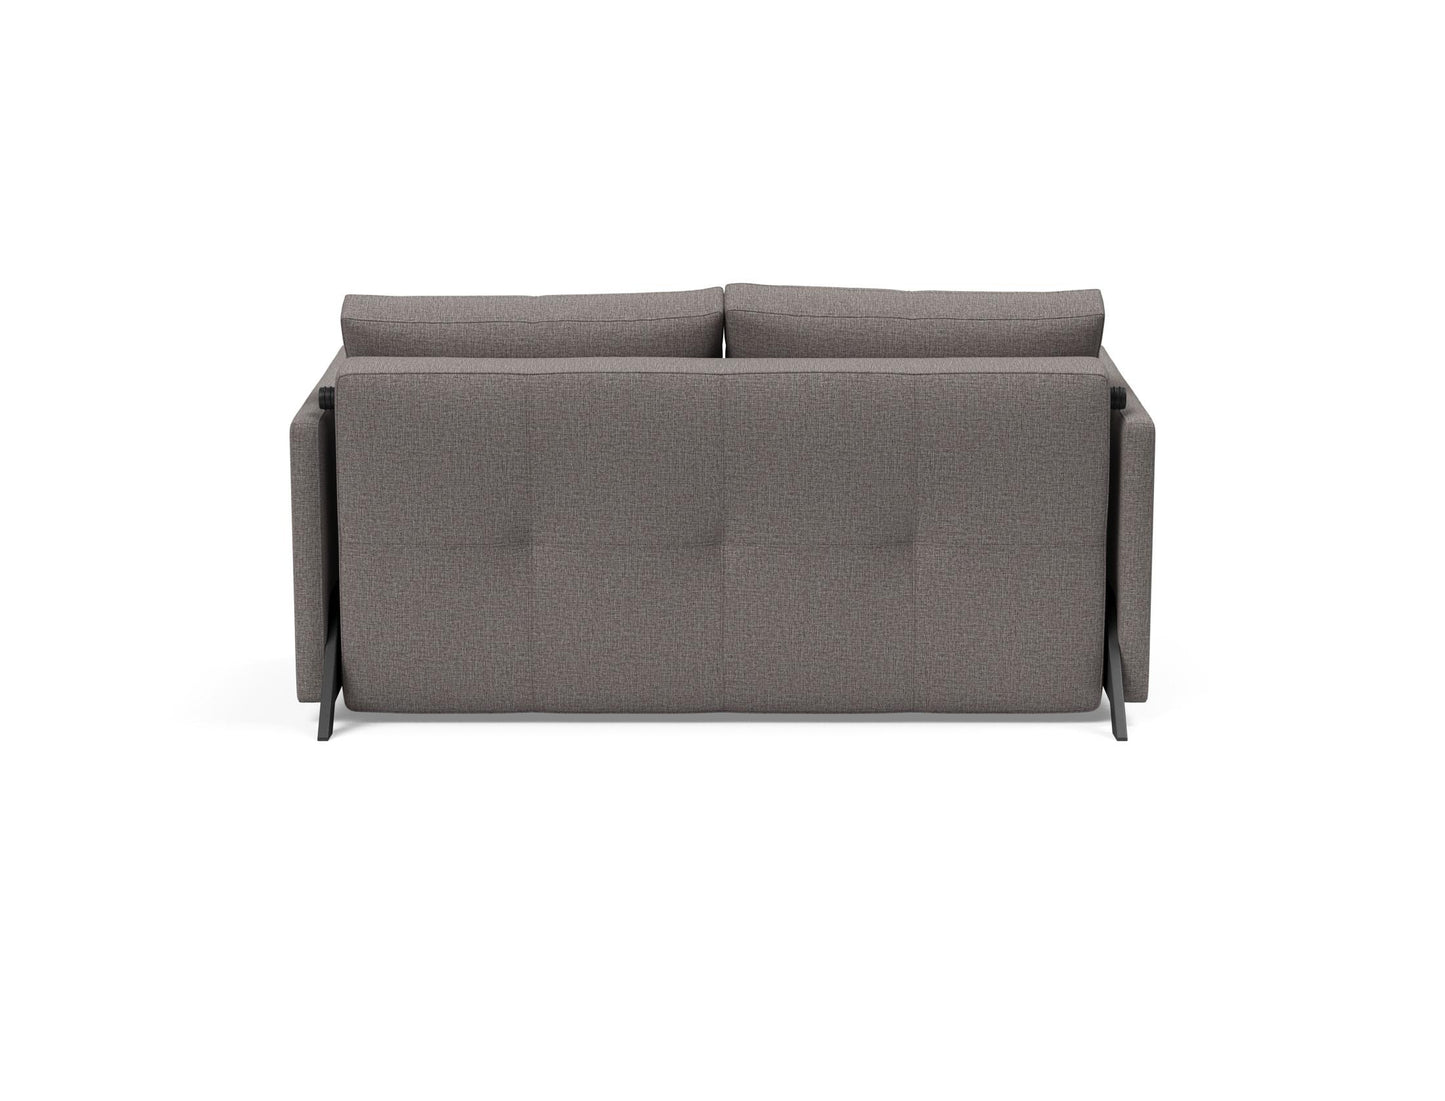 Cubed 02 Sofa w/Arms - Full